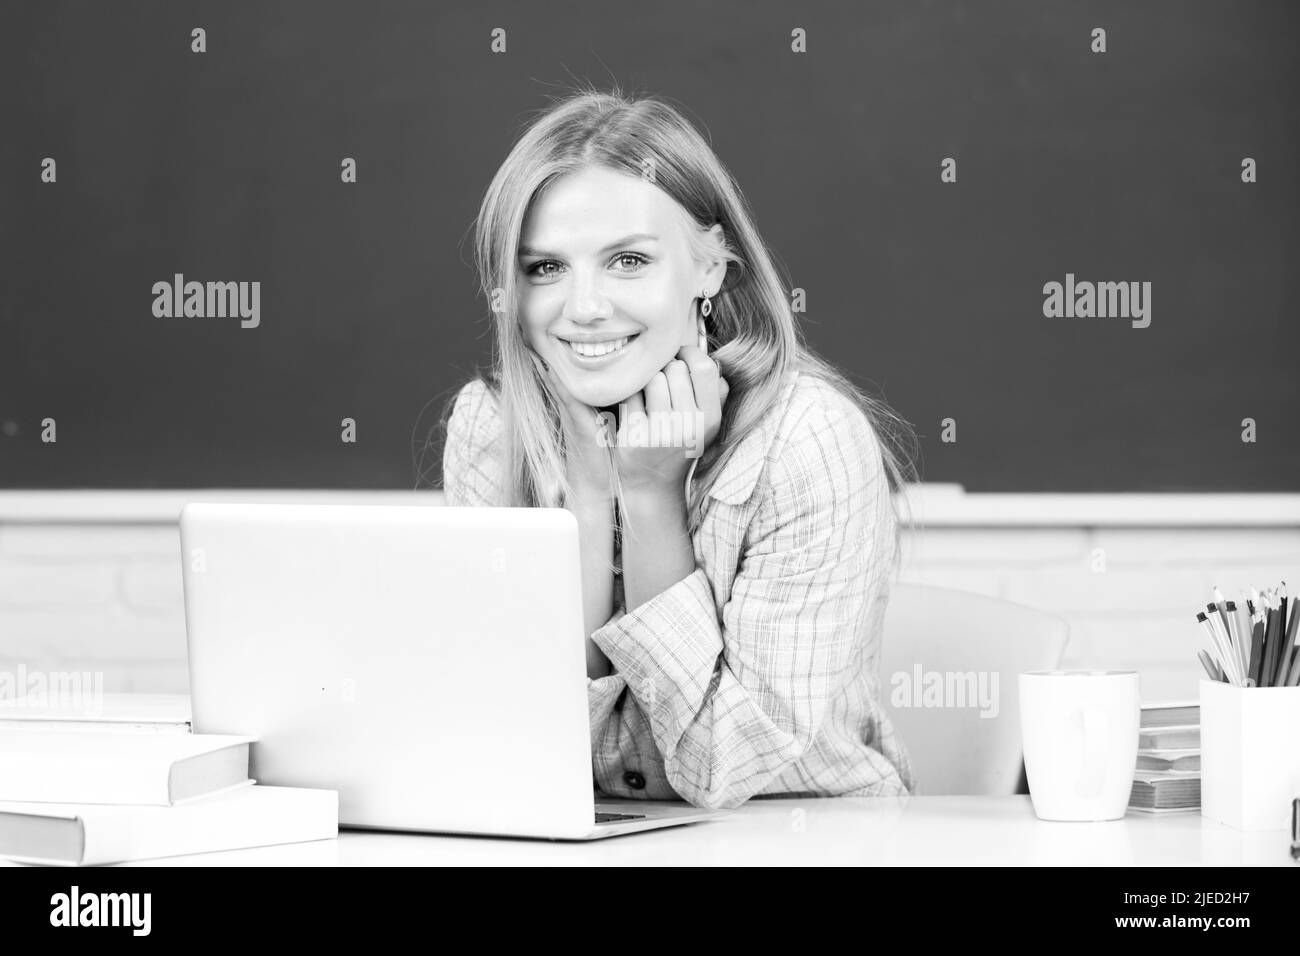 Portrait of smiling young college student studying in classroom. Creative young smiling female student using laptop. Stock Photo